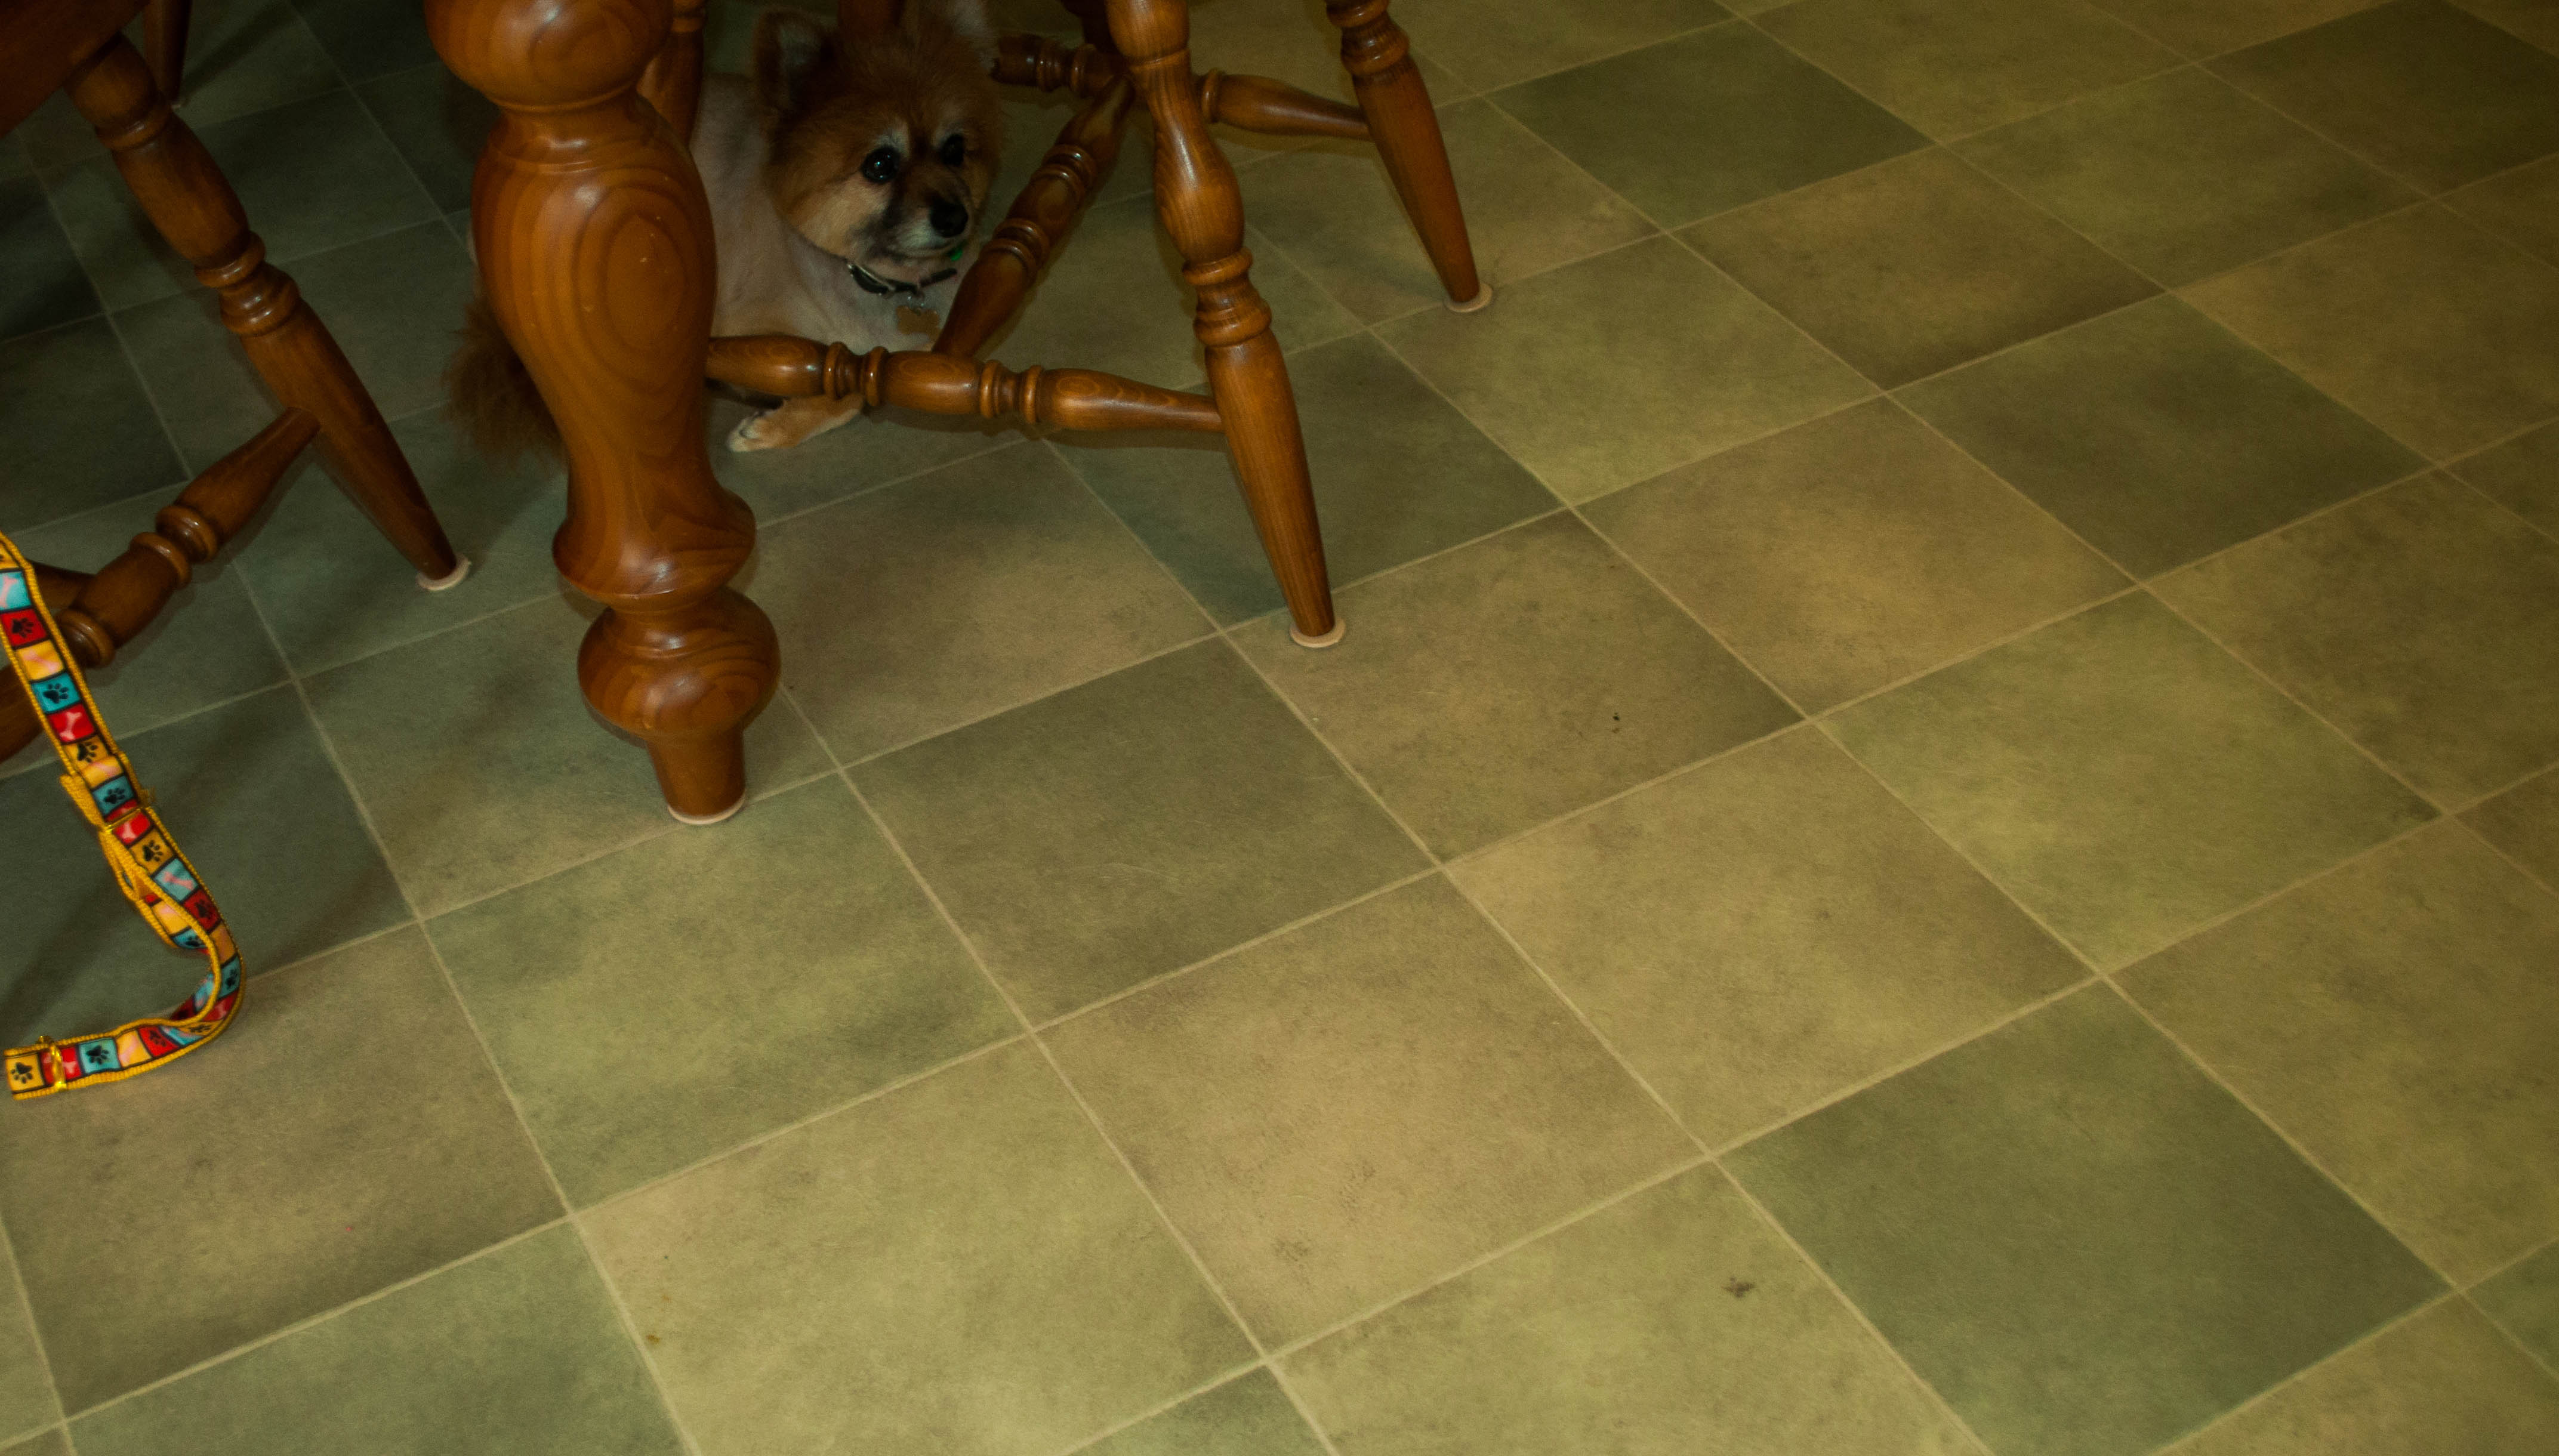 showing a kitchen floor with installed vinyl flooring that has a green and beige tile pattern on its surface.